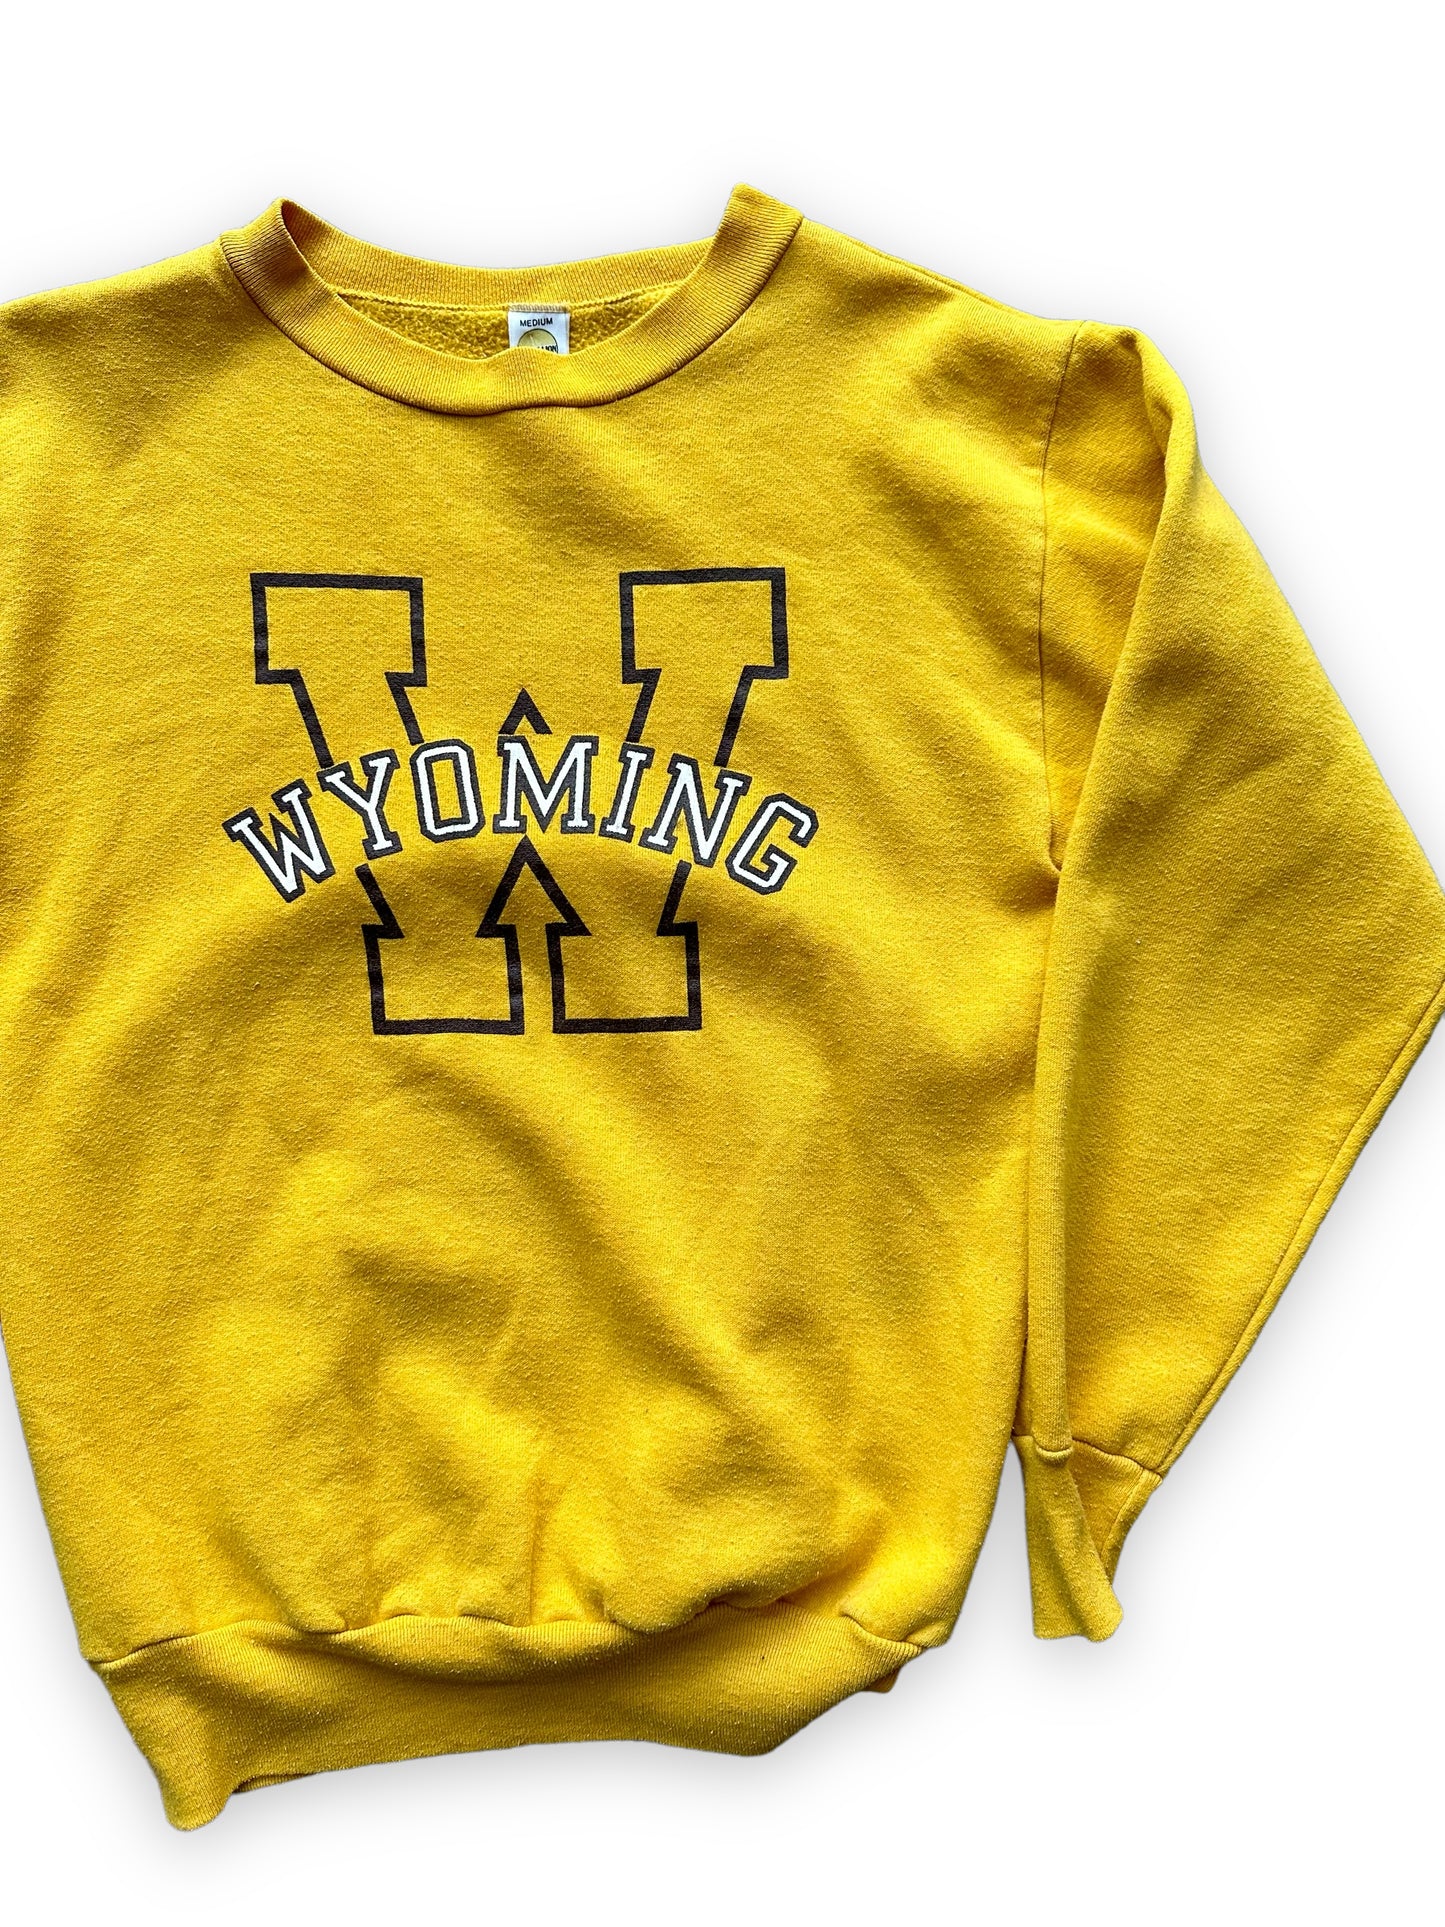 Front Left View of Vintage Yellow Wyoming Crewneck Sweatshirt SZ M | Vintage Crewneck Sweatshirt Seattle | Barn Owl Vintage Seattle